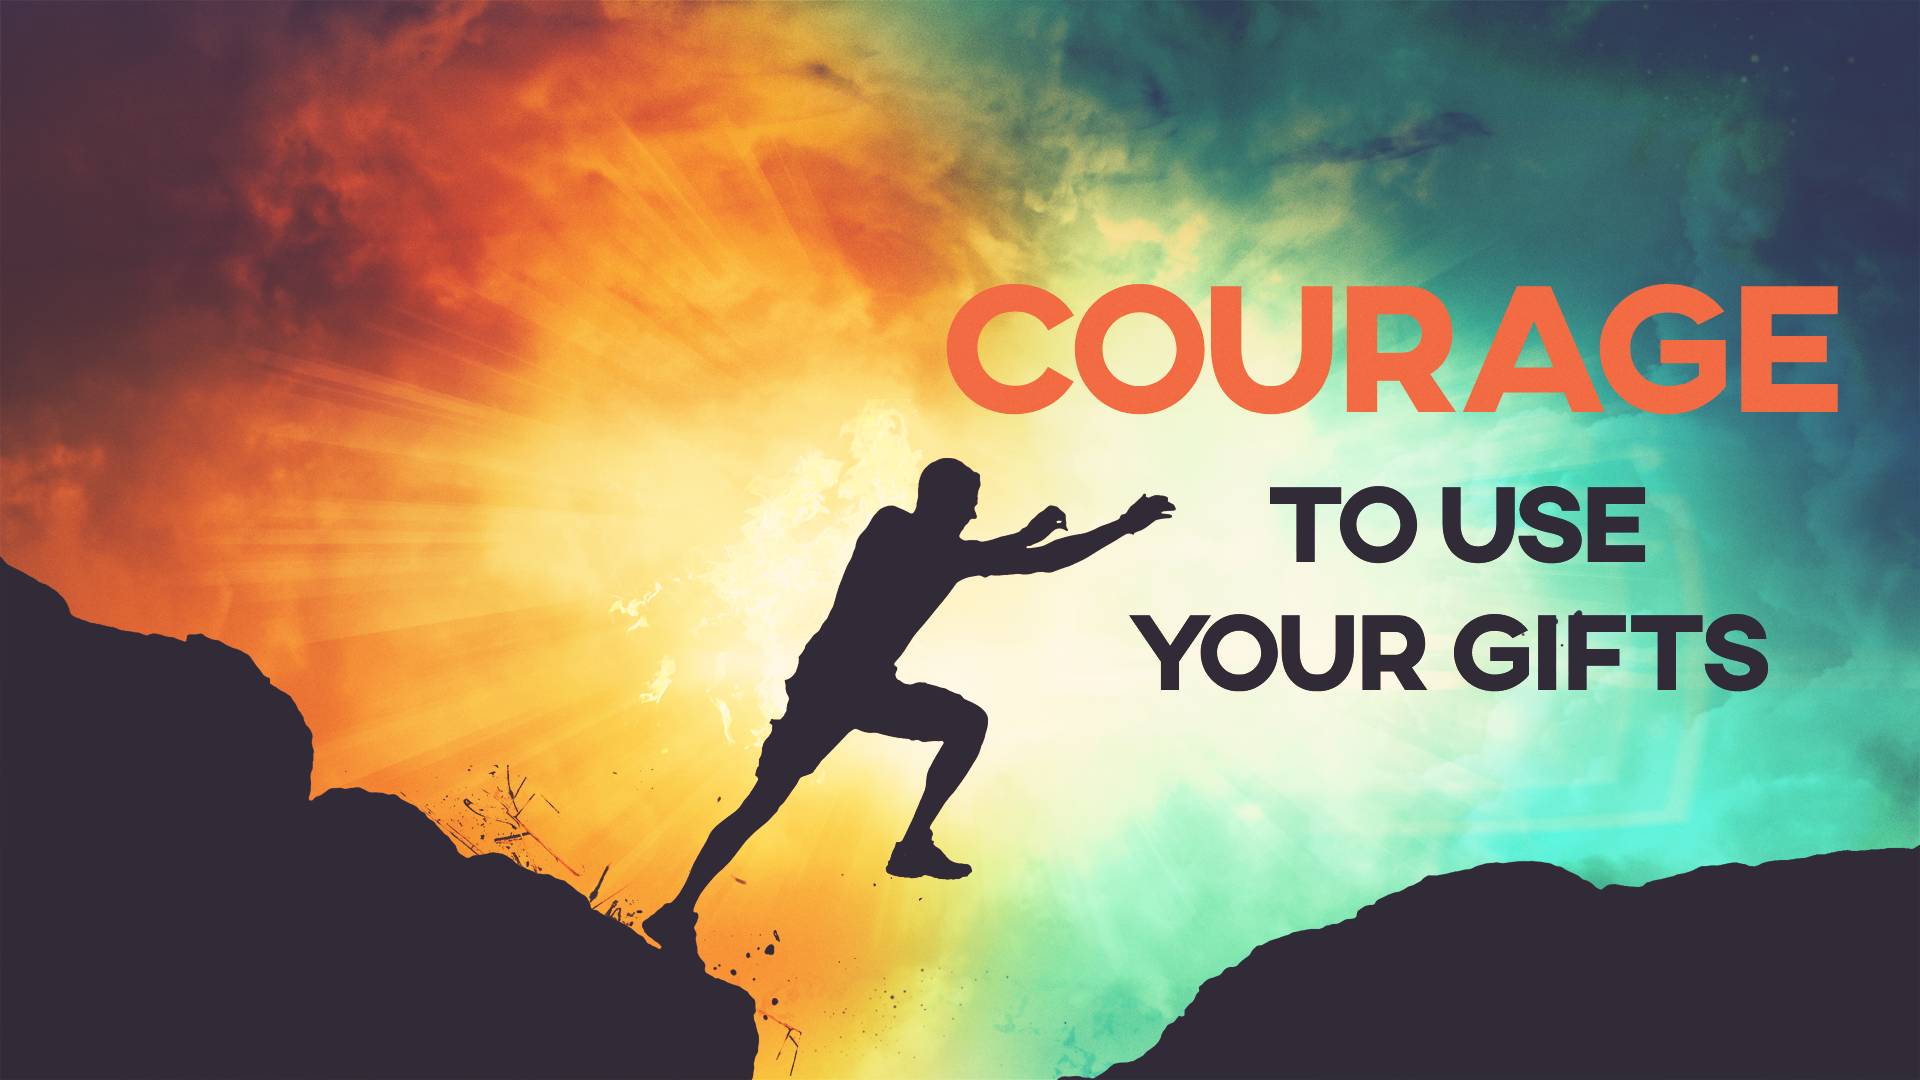 Courage to Use Your Gifts